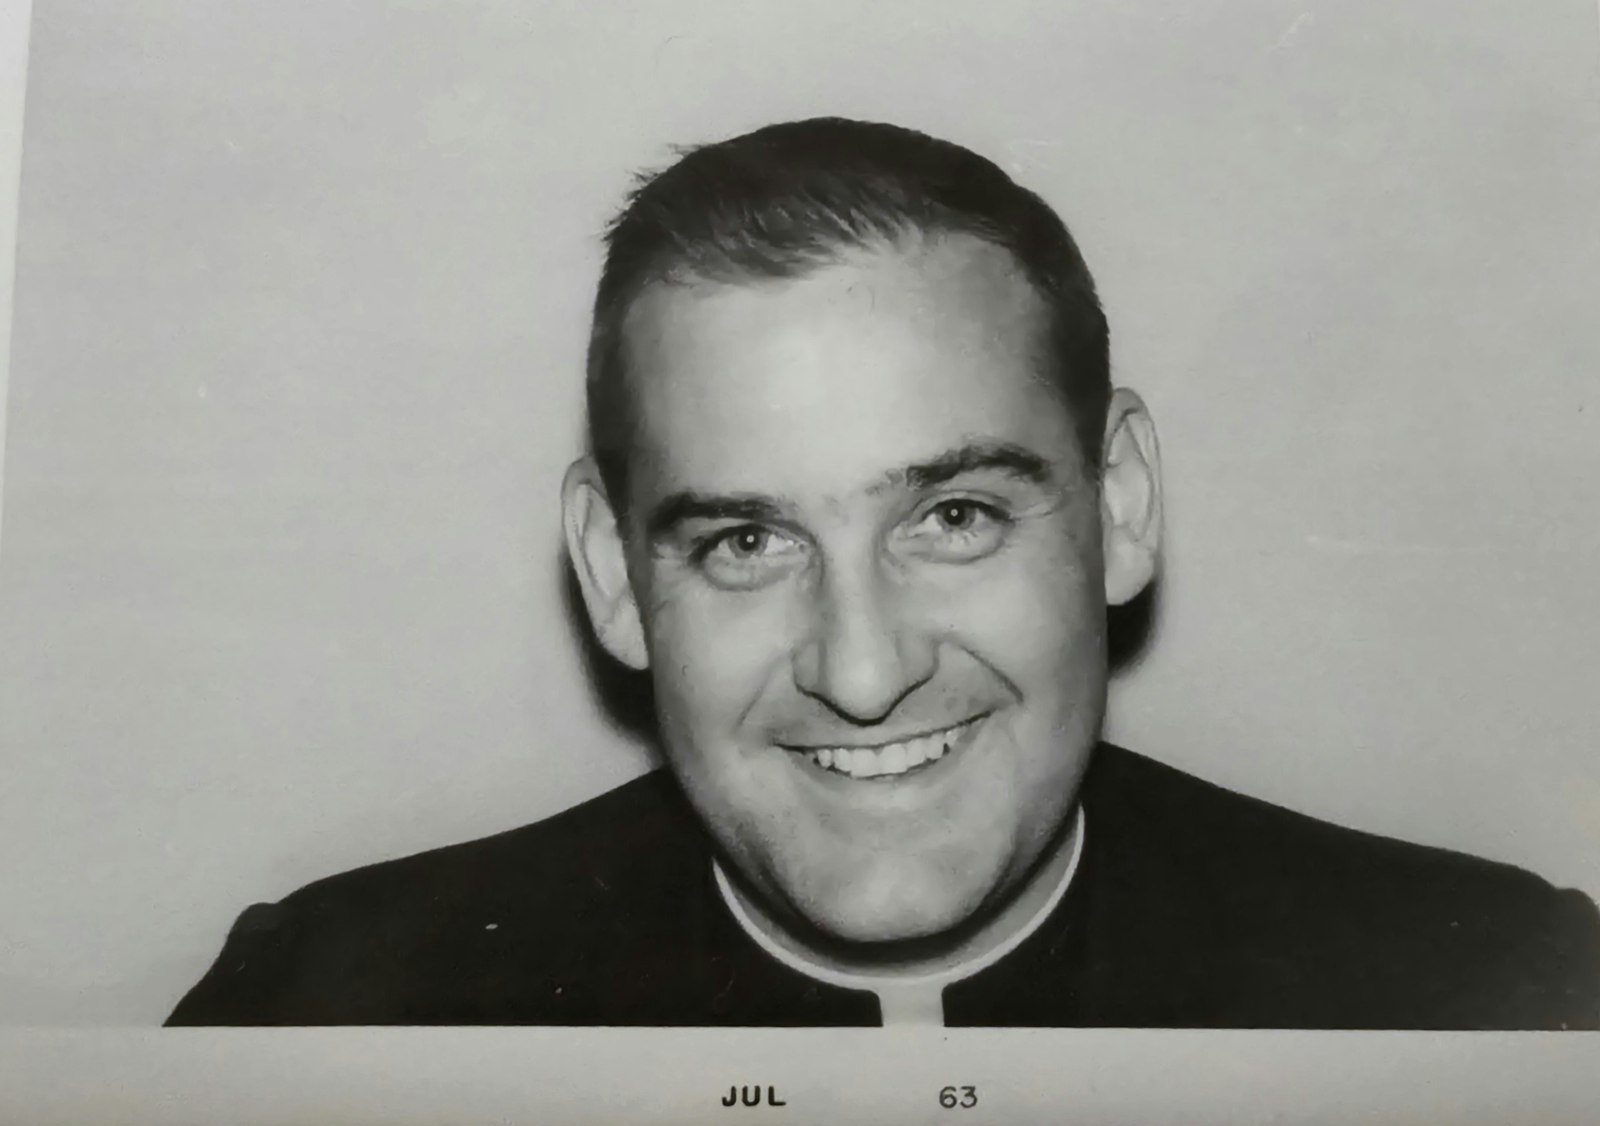 A photo of then Fr. James Moloney taken in July 1963 after he was named director for the Archdiocese of Detroit's Society for the Propagation of the Faith. (courtesy photo)